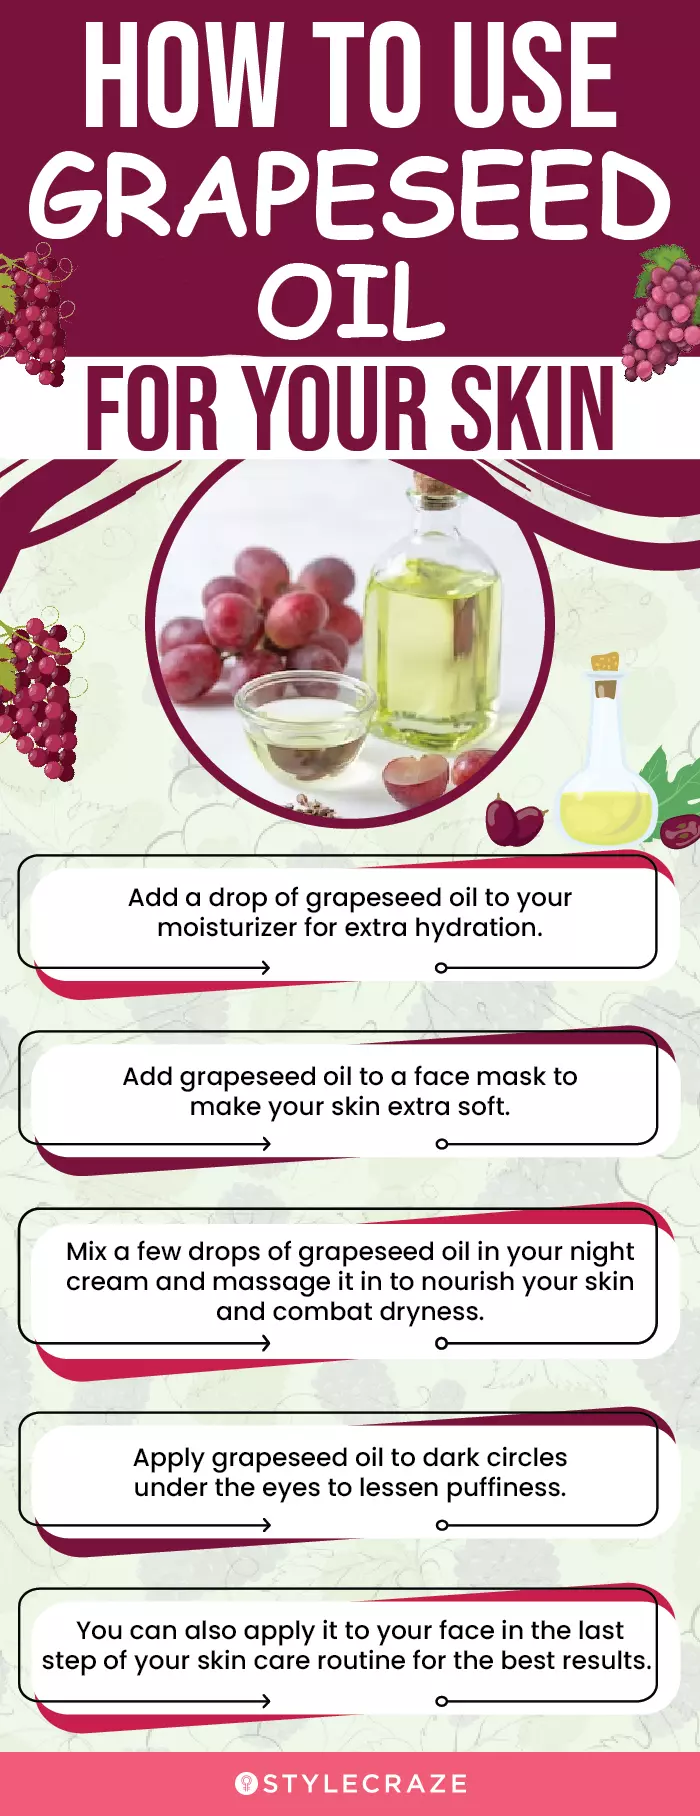 How To Use Grapeseed Oil For Your Skin (infographic)